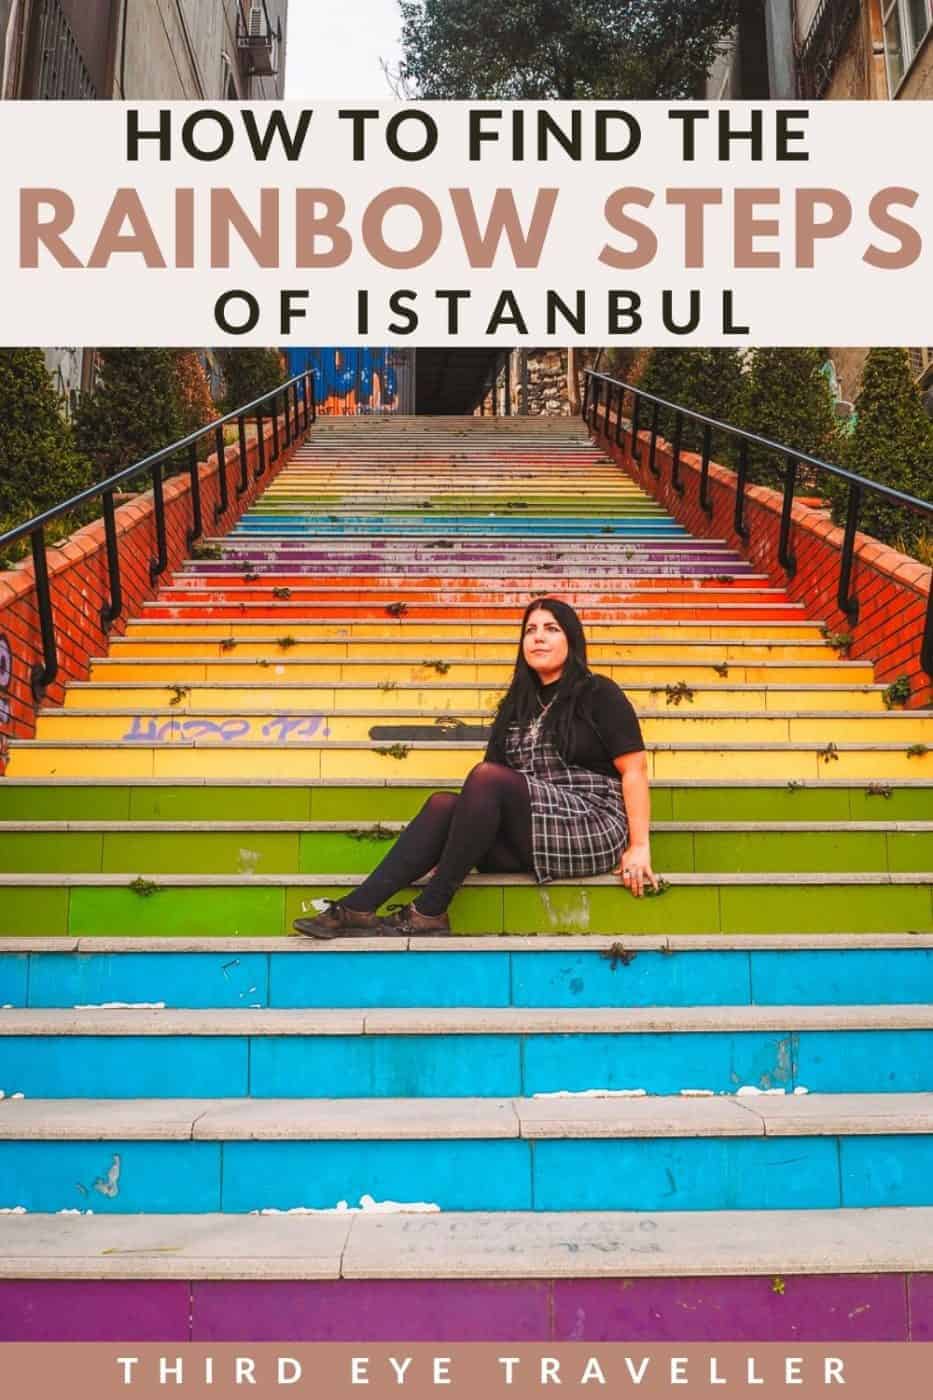 how to find the rainbow steps in Istanbul